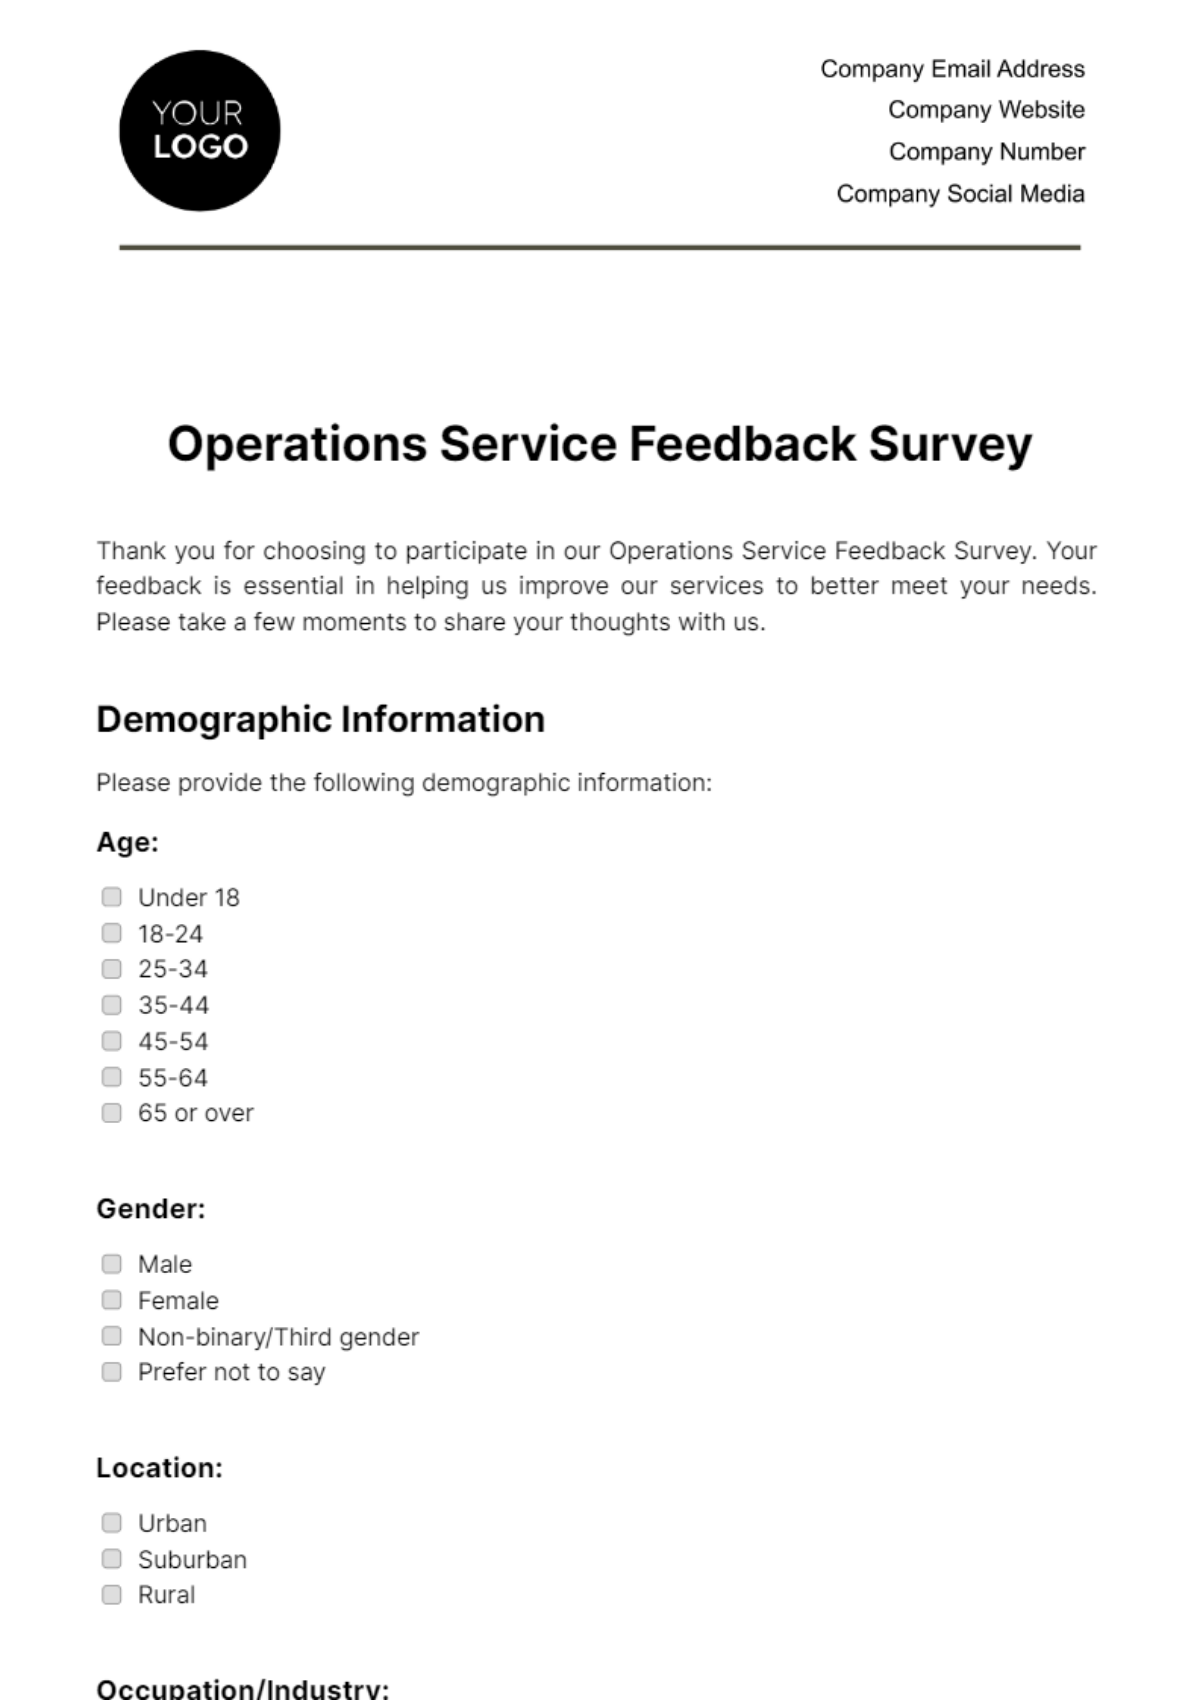 Free Operations Service Feedback Survey Template